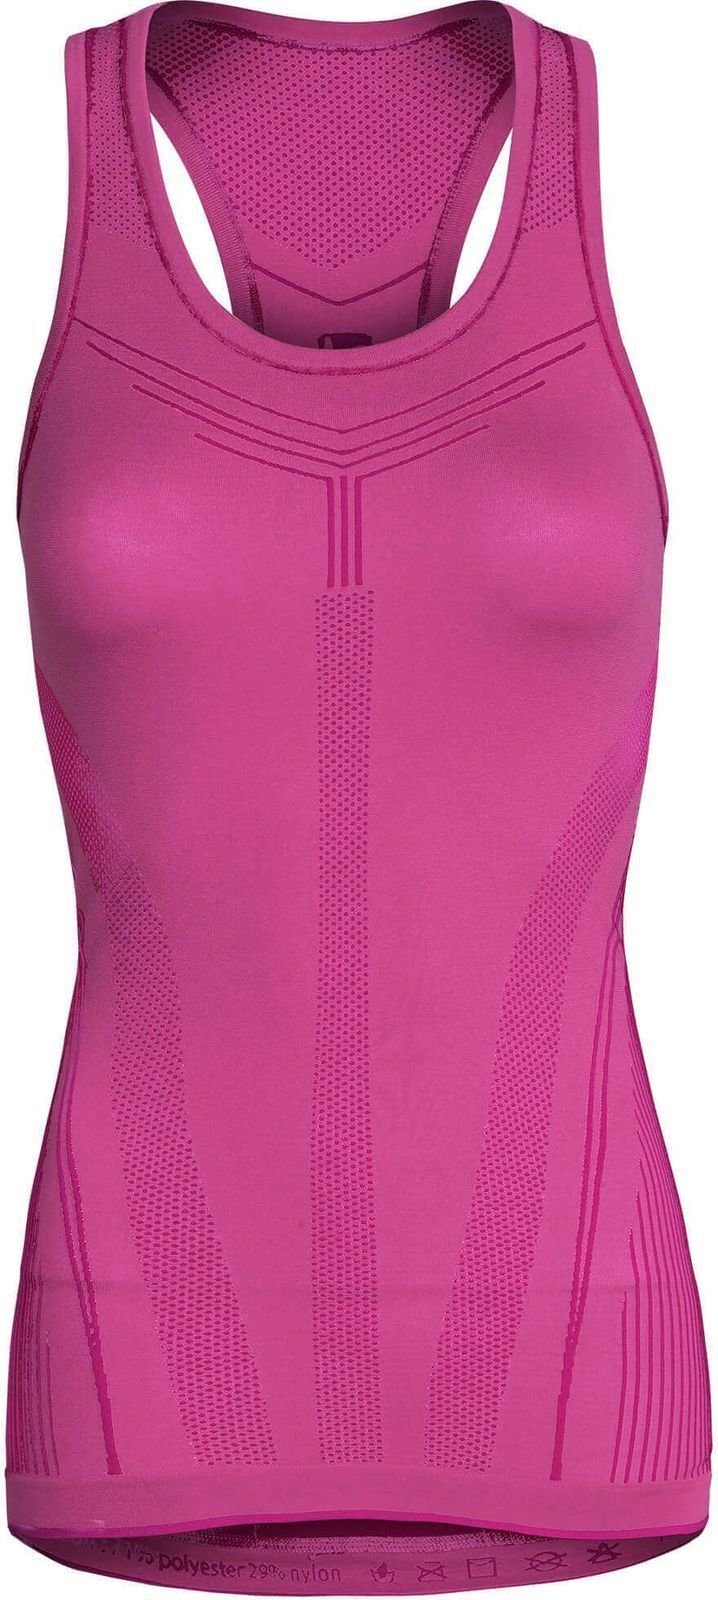 Cycling jersey Funkier Vetica Pink M/L